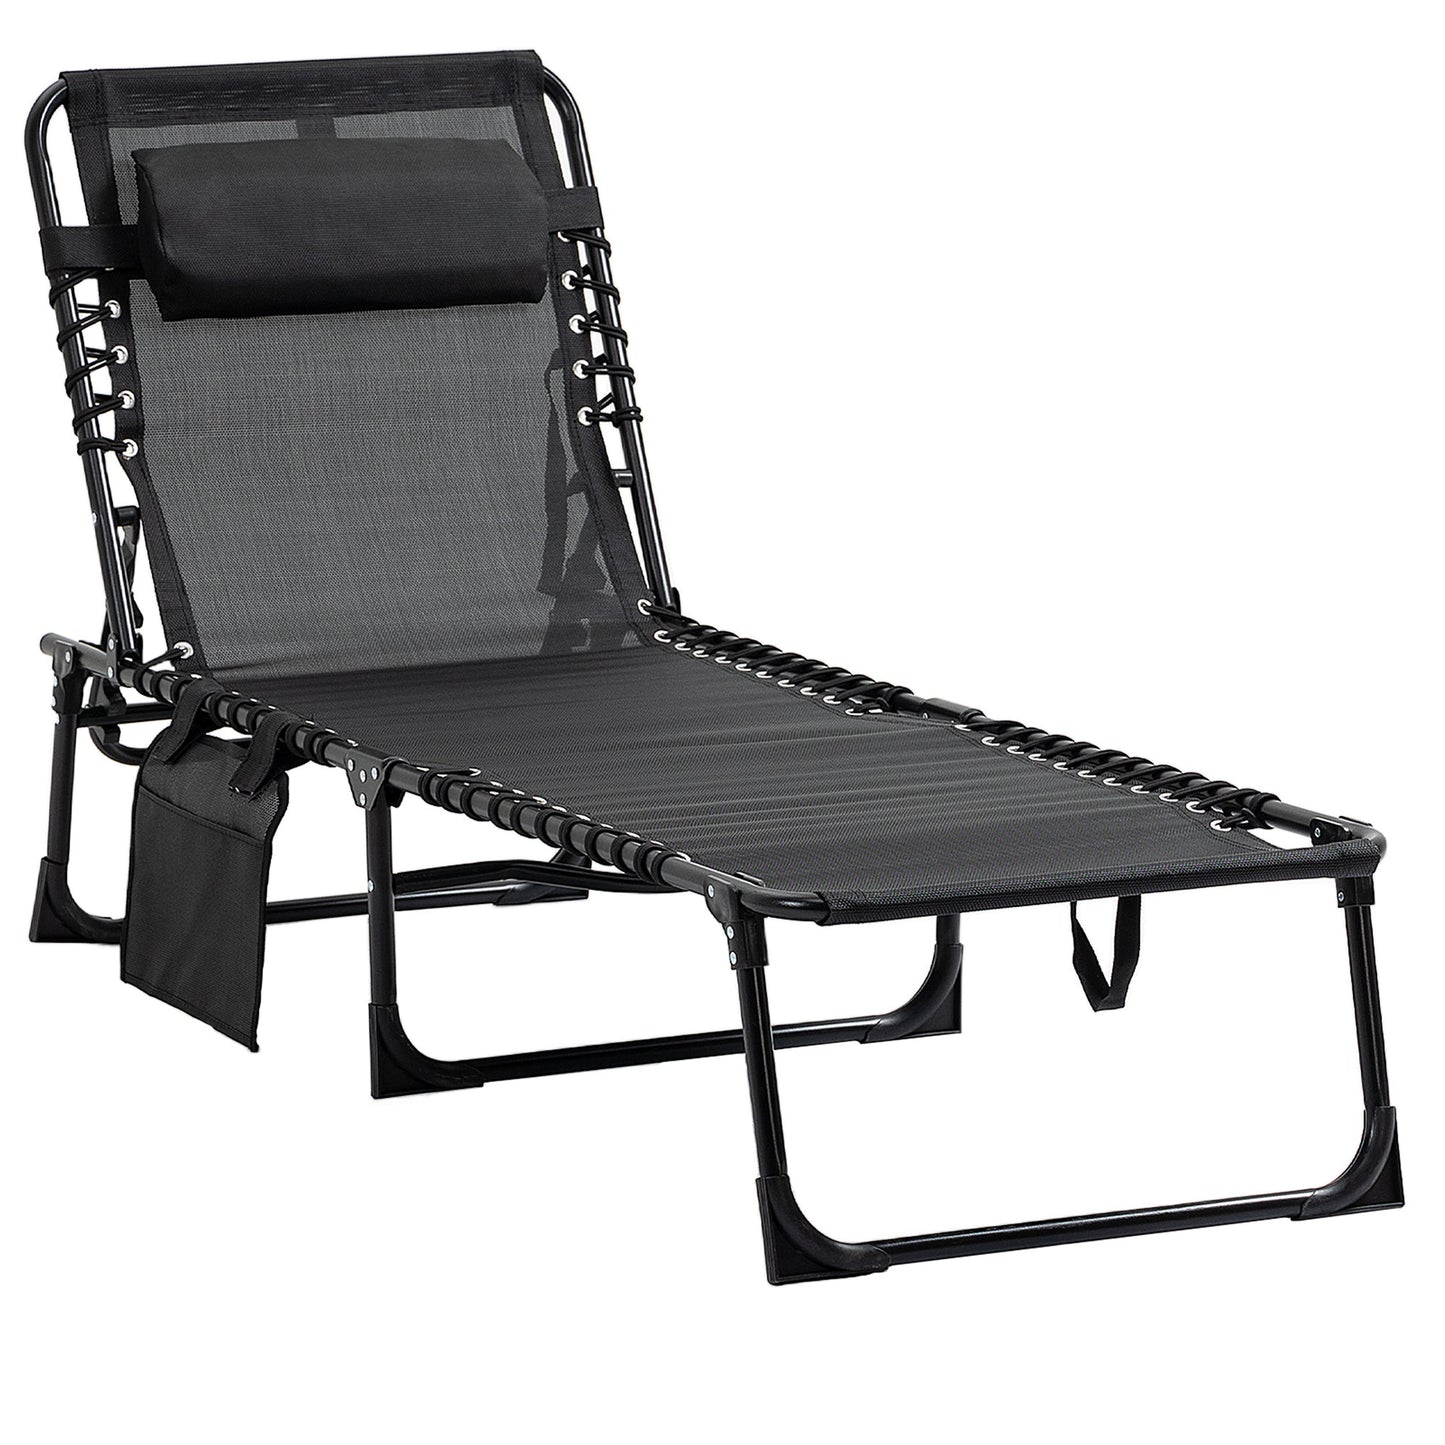 Miscellaneous-Reclining Lounge Chair, Portable Sun Lounger, Folding Camping Cot, with Adjustable Backrest and Removable Pillow, for Patio, Garden, Beach - Black - Outdoor Style Company